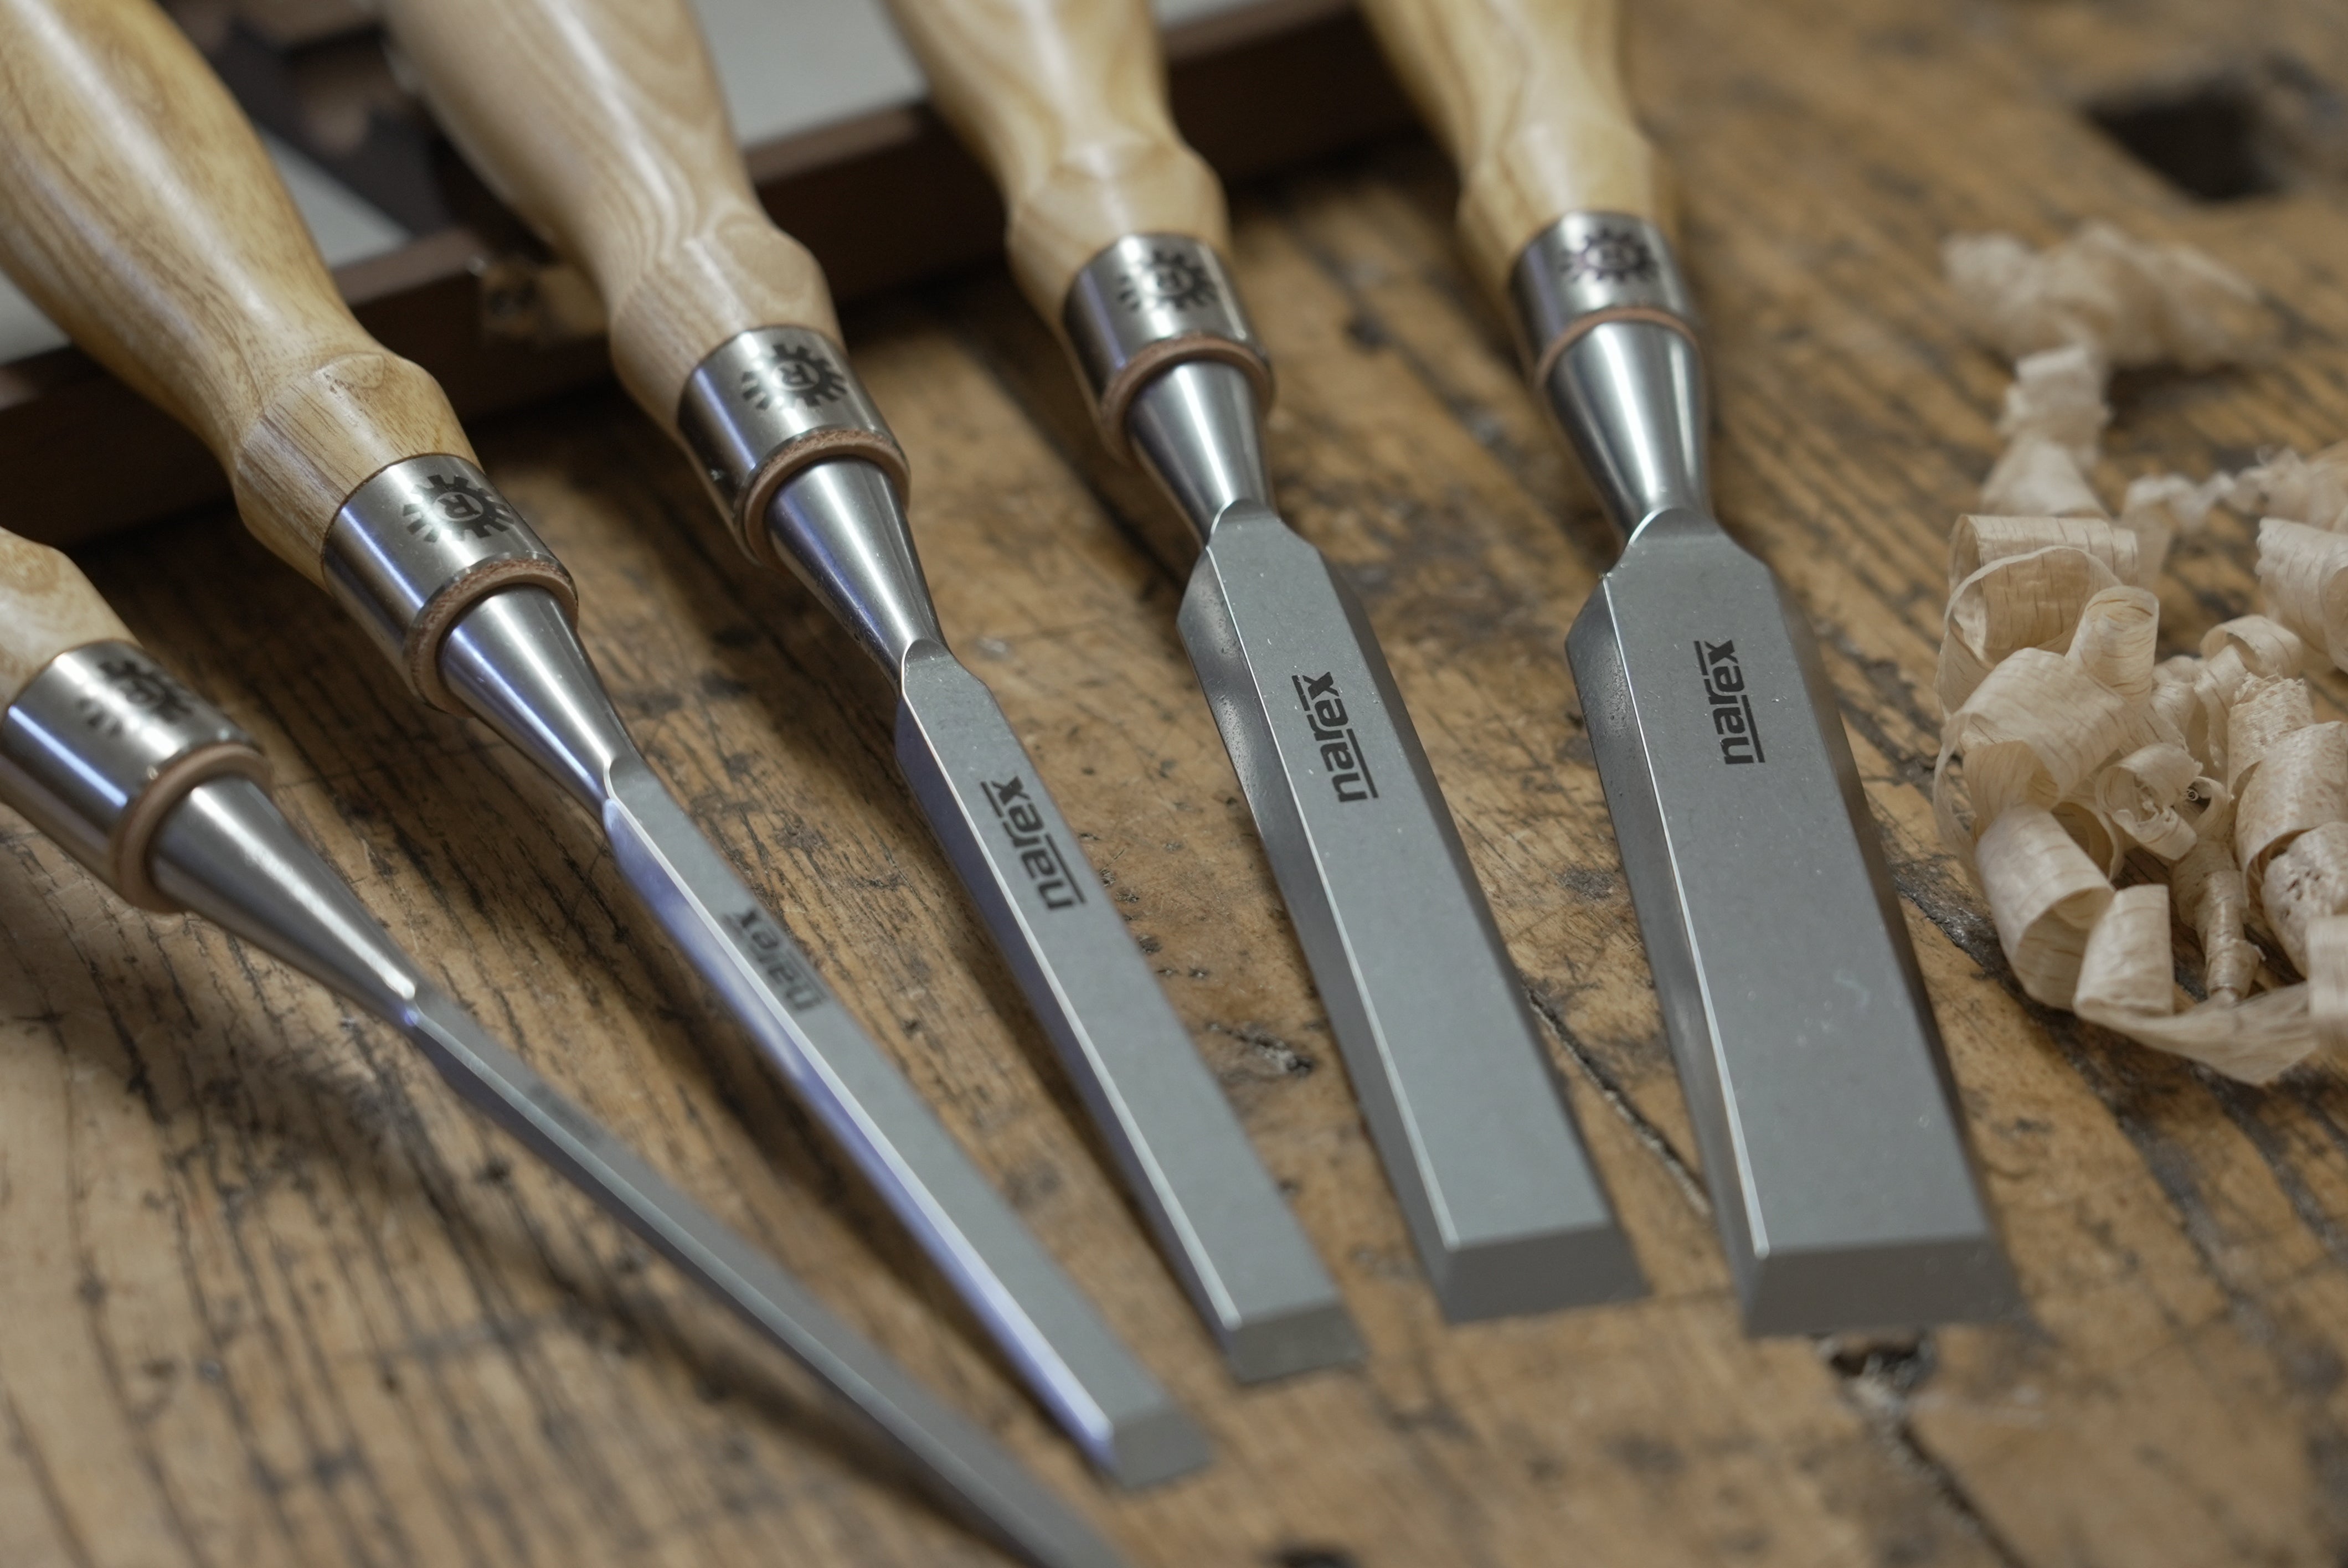 Set of Bevel Edge Chisels 5Pce RICHTER (6mm (1/4"), 10mm (3/8"), 13mm (1/2"), 19mm (3/4"), 25mm(1")) 853600 by Narex